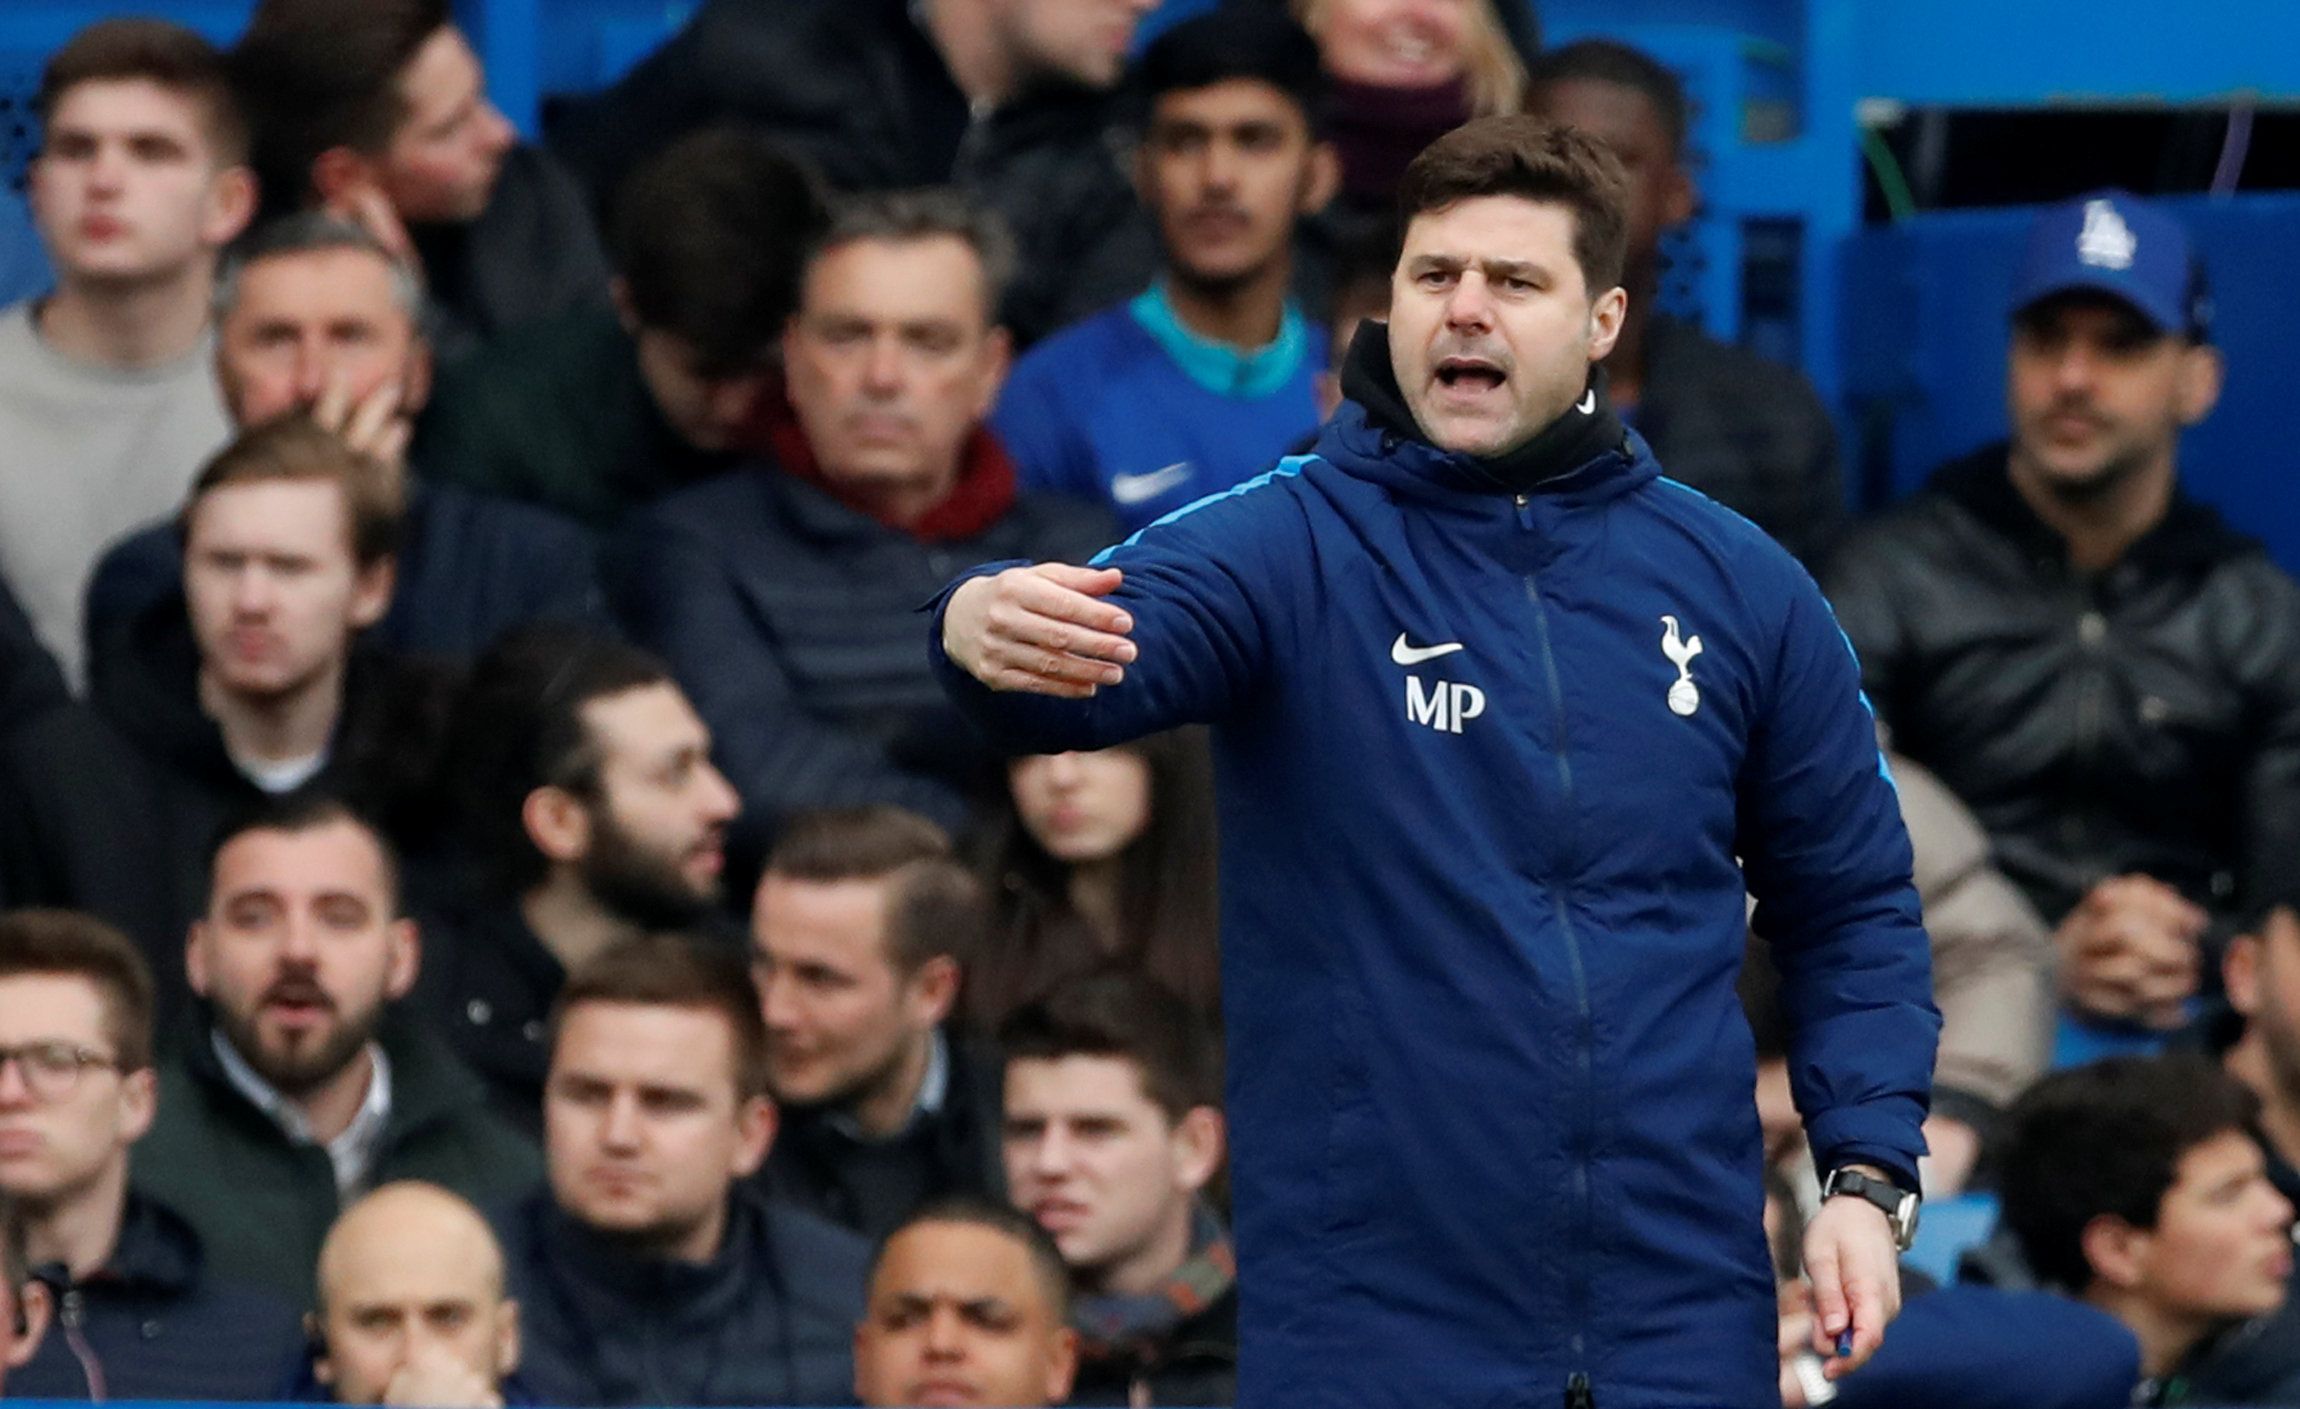 Soccer Football - Premier League - Chelsea vs Tottenham Hotspur - Stamford Bridge, London, Britain - April 1, 2018   Tottenham manager Mauricio Pochettino   Action Images via Reuters/Matthew Childs    EDITORIAL USE ONLY. No use with unauthorized audio, video, data, fixture lists, club/league logos or 